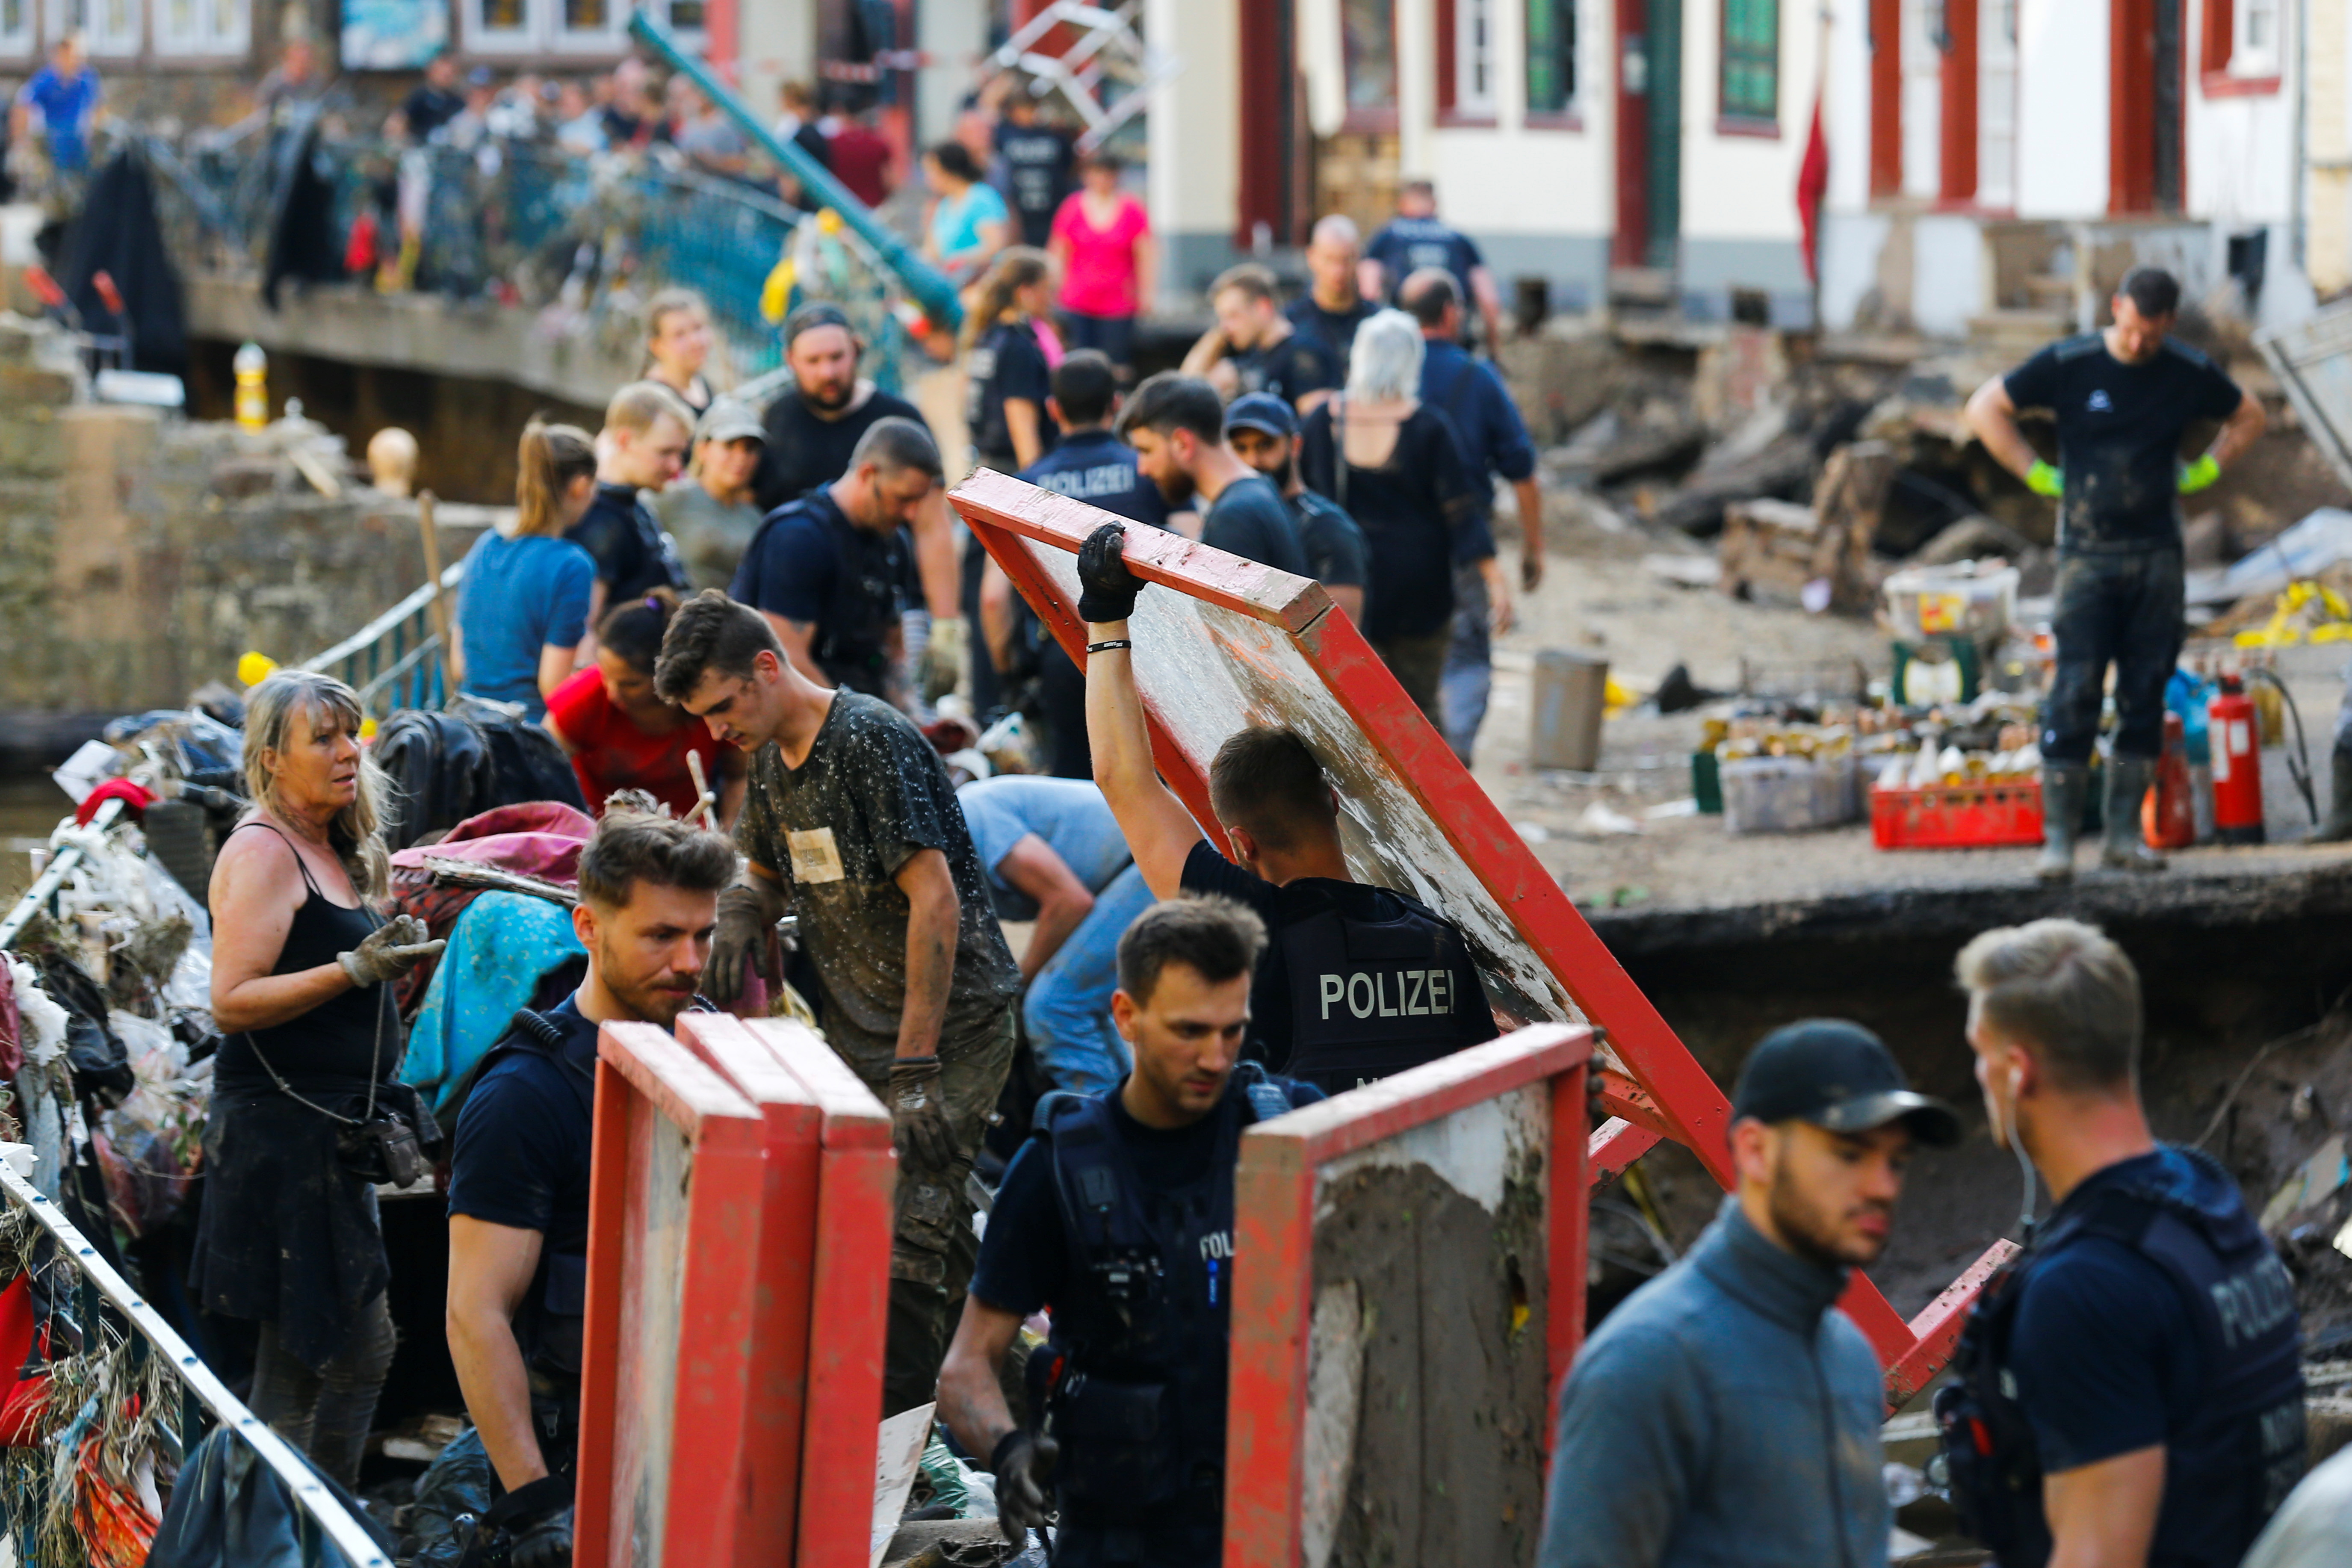 Police officers and volunteers clean up rubble in an area affected by flooding caused by heavy rains in Bad Muenstereifel, Germany, July 18, 2021. REUTERS / Thilo Schmuelgen